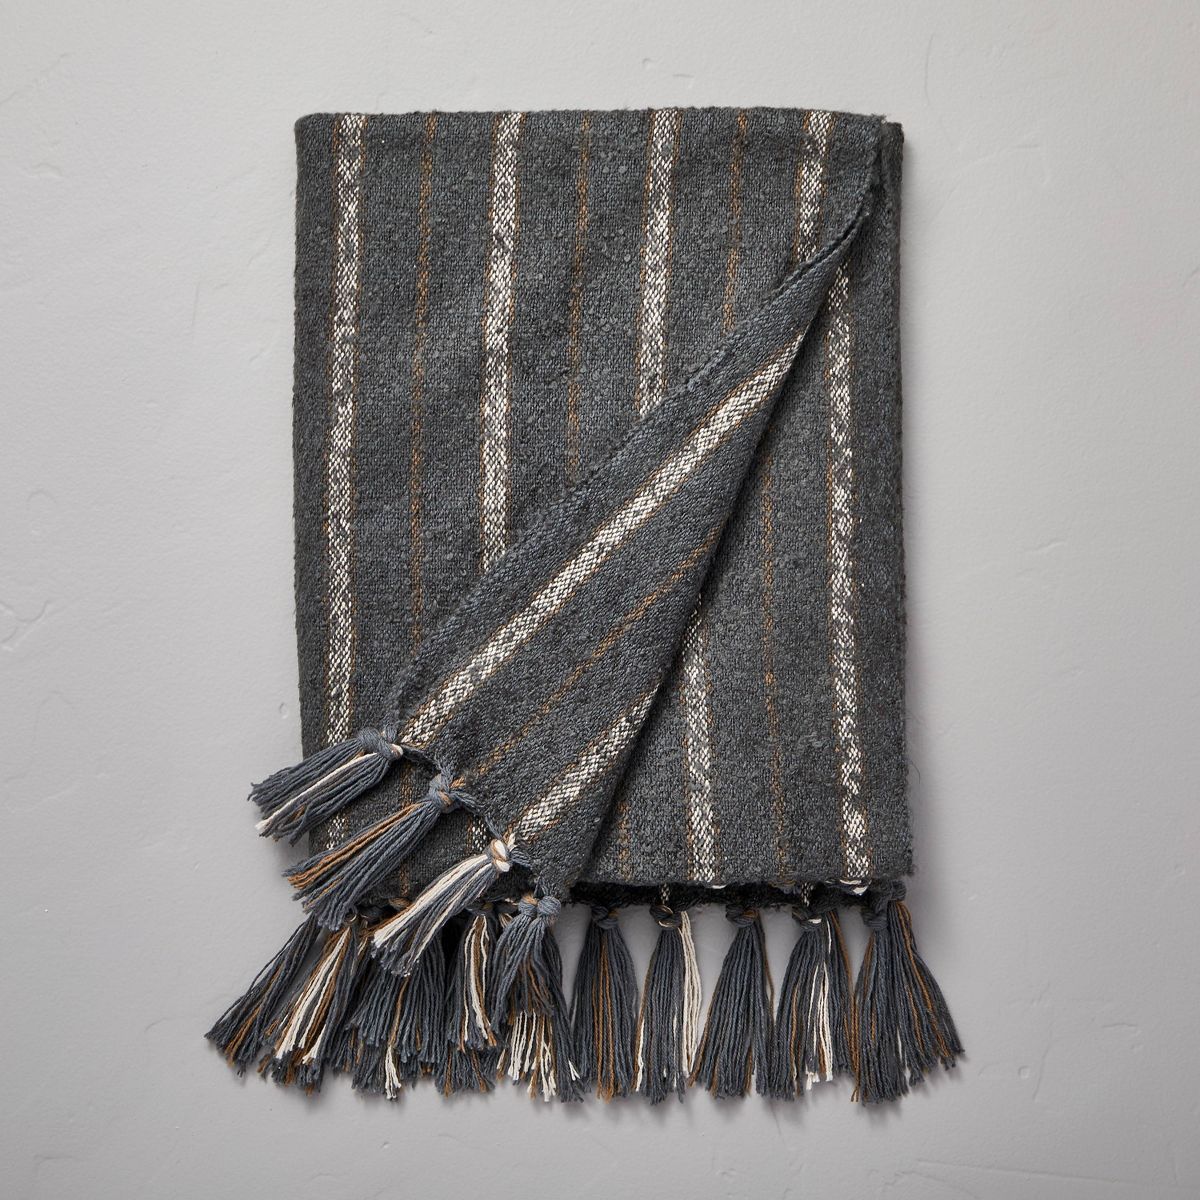 Chipped Stripe Woven Throw Blanket Dark Gray/Cream/Almond - Hearth & Hand™ with Magnolia | Target